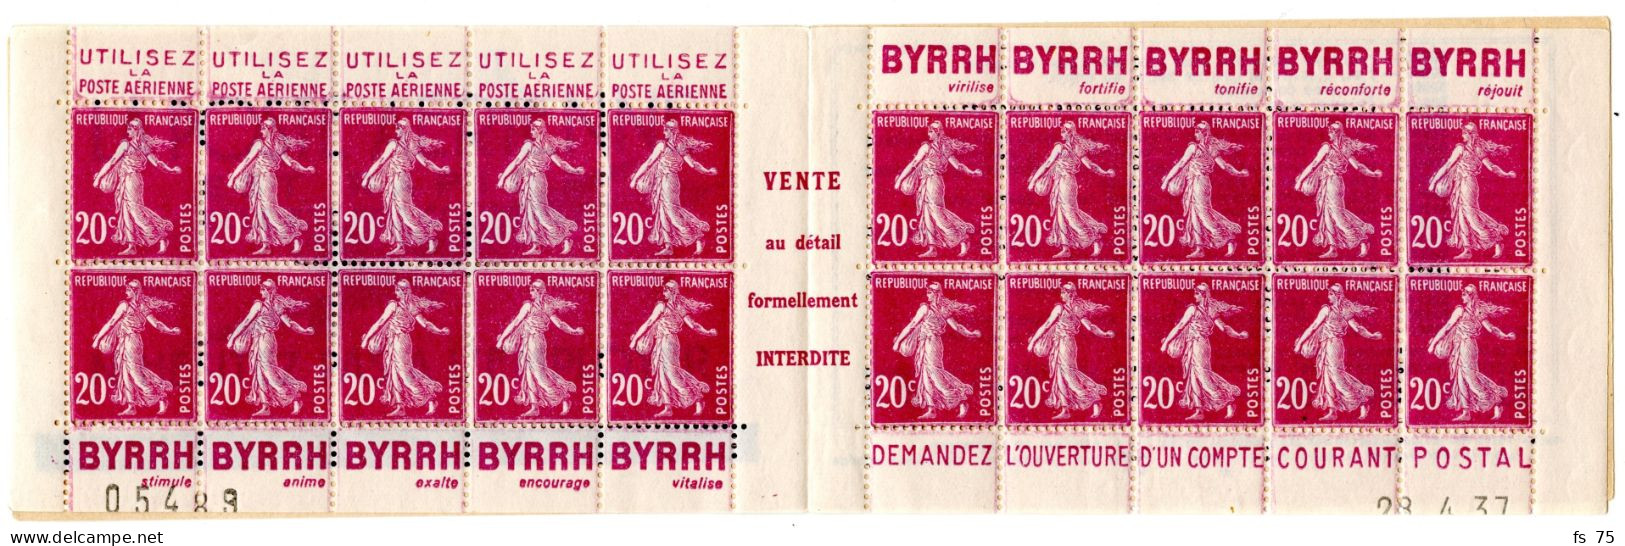 FRANCE N°190 - 20C LILAS ROSE SEMEUSE CAMEE - CARNET 1a - S. 9 - POSTE AERIENNE / BYYRH / BYRRH / CCP - COIN DATE - Unused Stamps